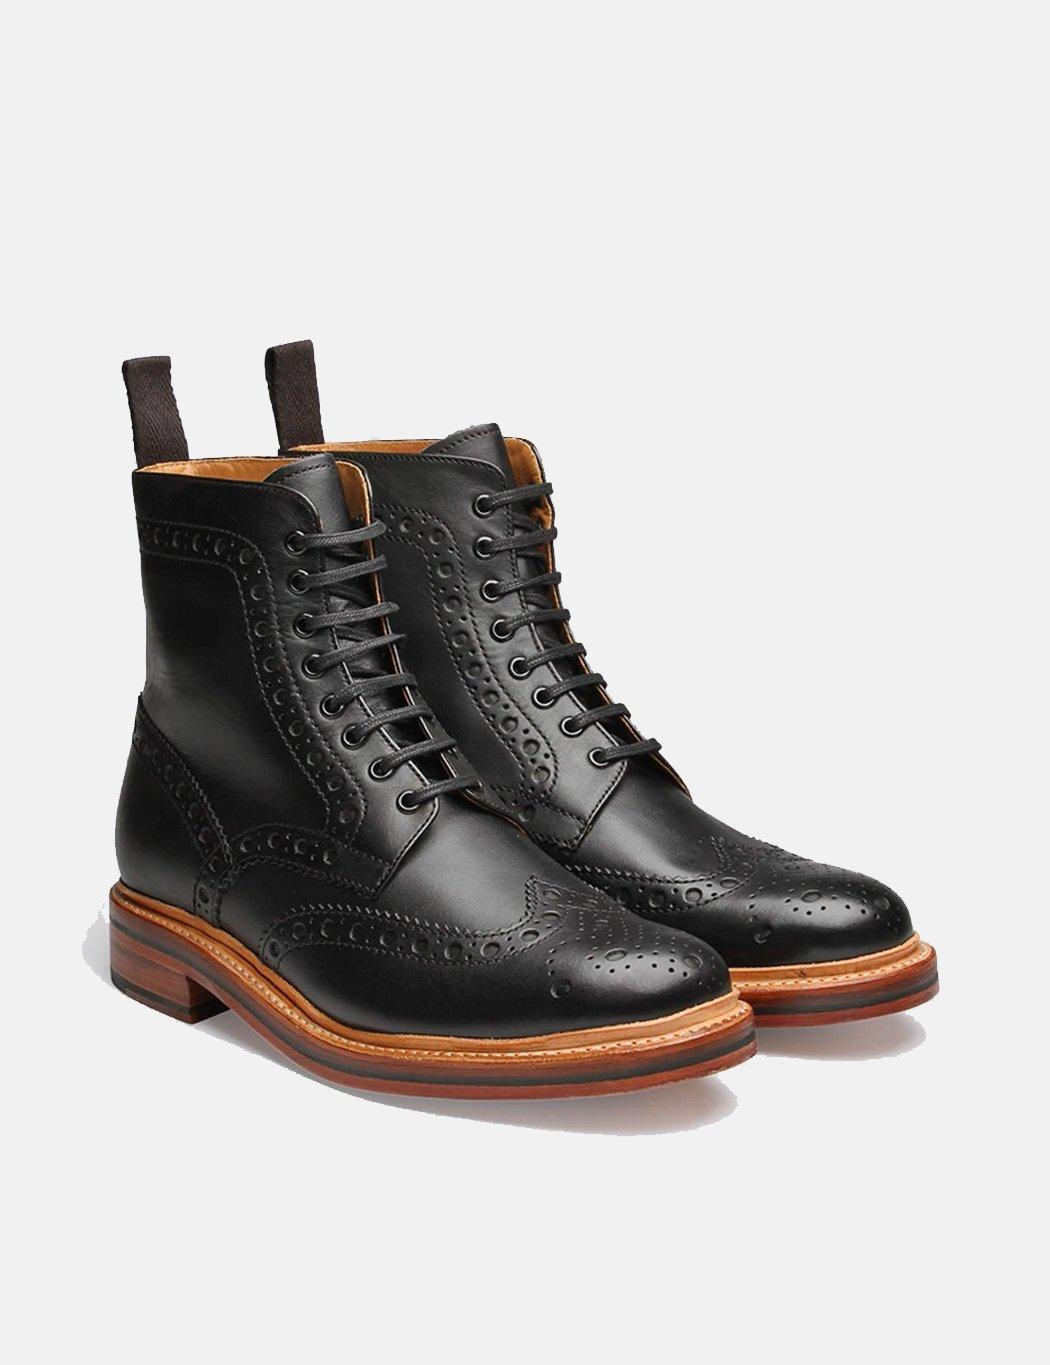 Grenson Leather Fred Calf Brogue Derby Boot in Black for Men - Save 71% ...